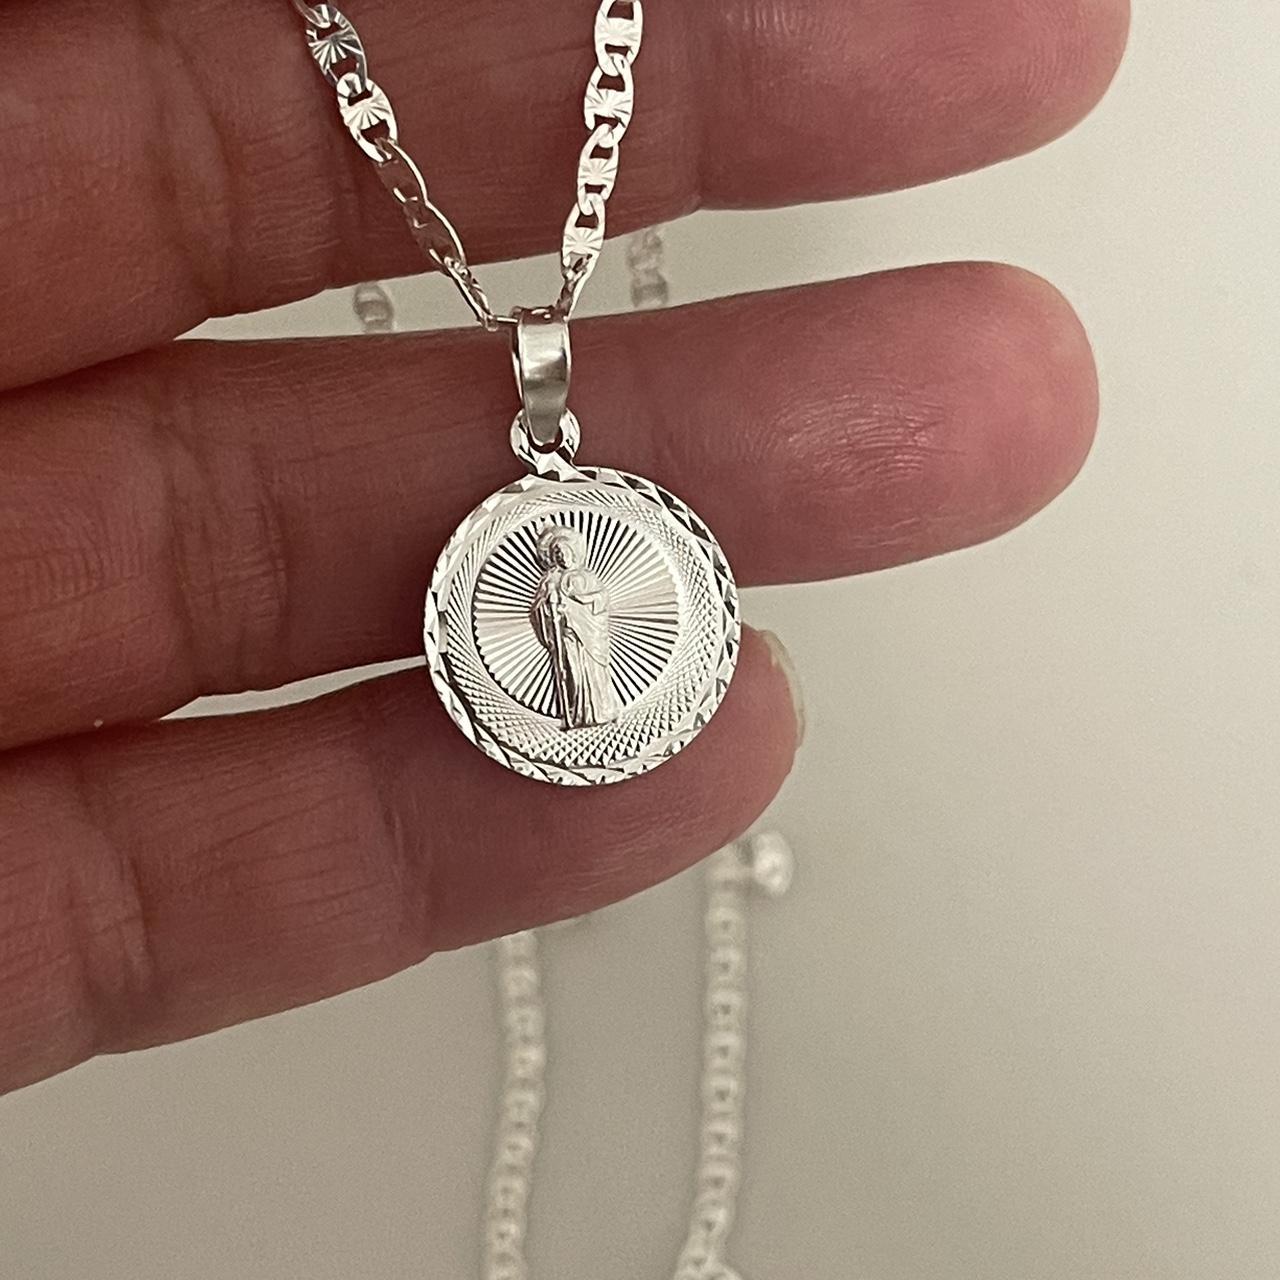 Buy Personalized Saint Jude Necklace Gold Stainless Steel Birthstone  Jewelry Catholic Medal Patron Saint of Hope and Impossible Causes Online in  India - Etsy